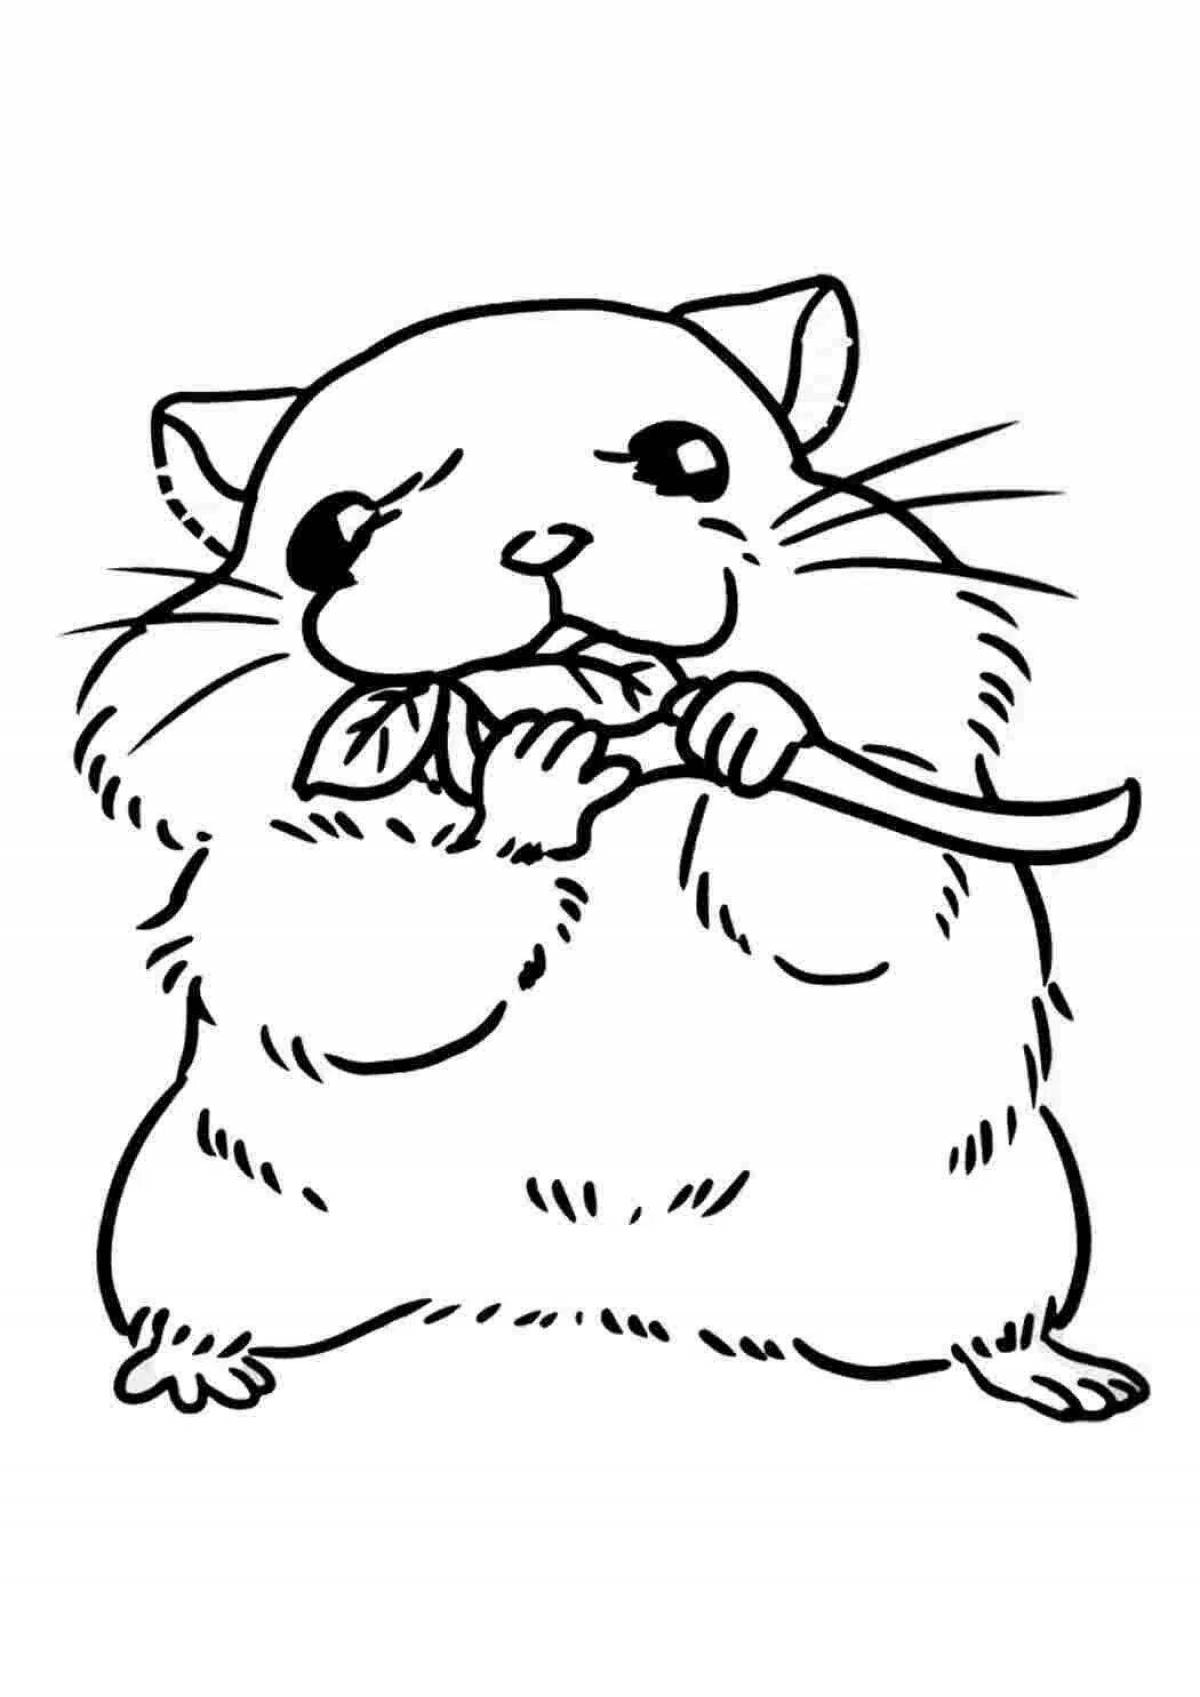 Gorgeous Djungarian hamster coloring page